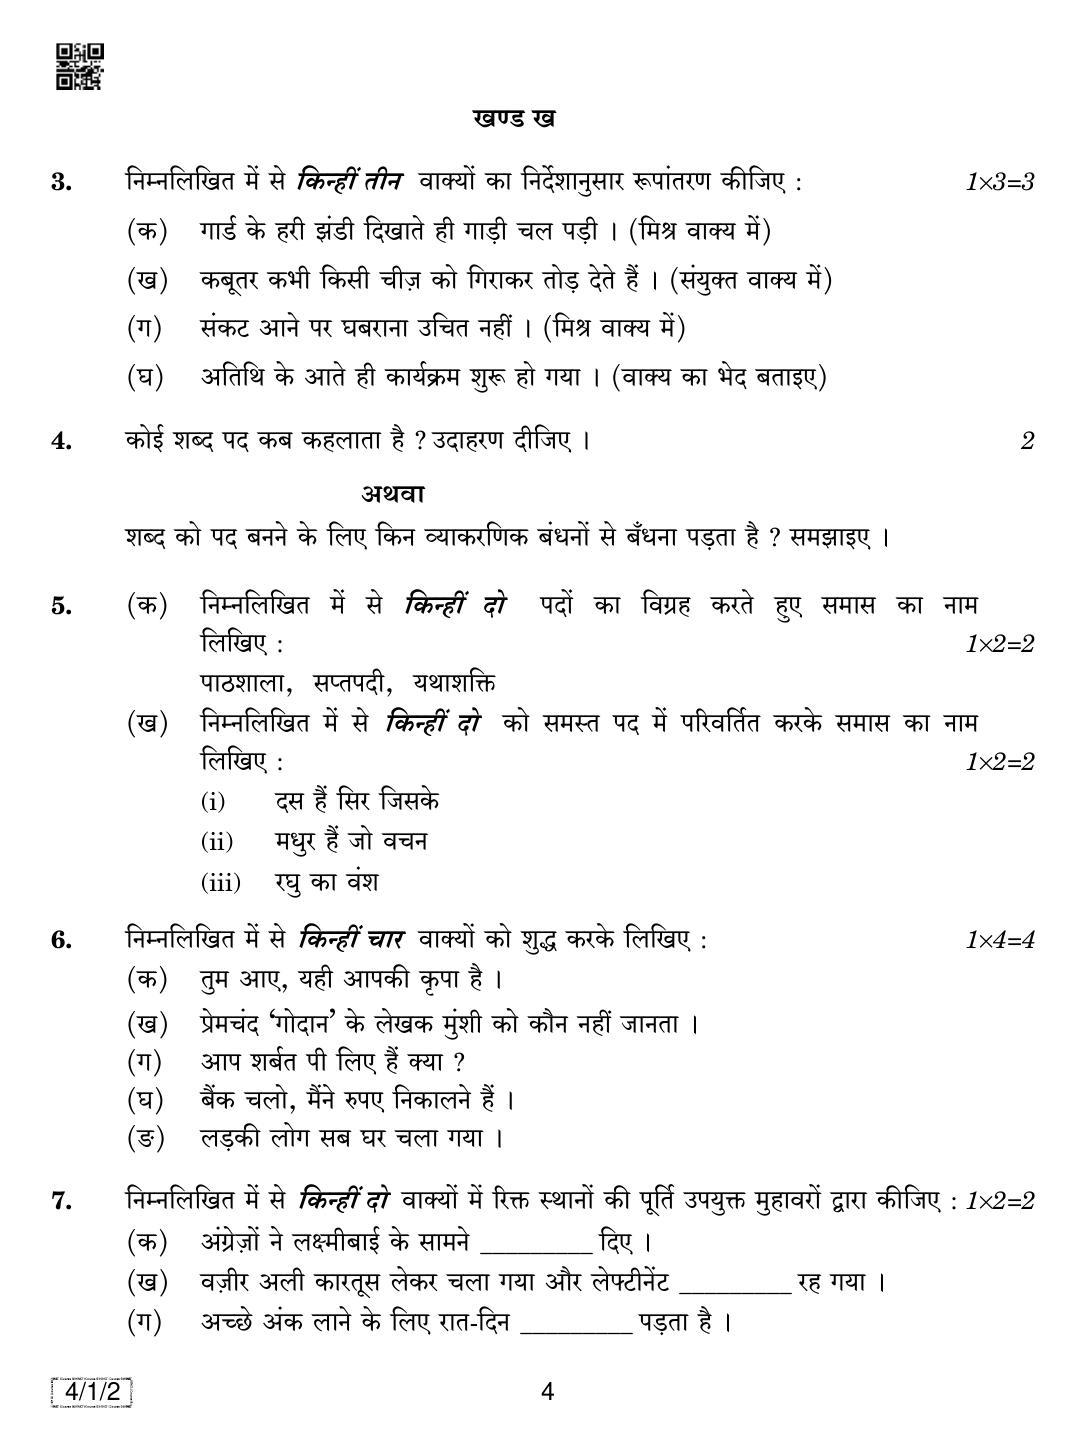 CBSE Class 10 4-1-2 HINDI B 2019 Compartment Question Paper - Page 4